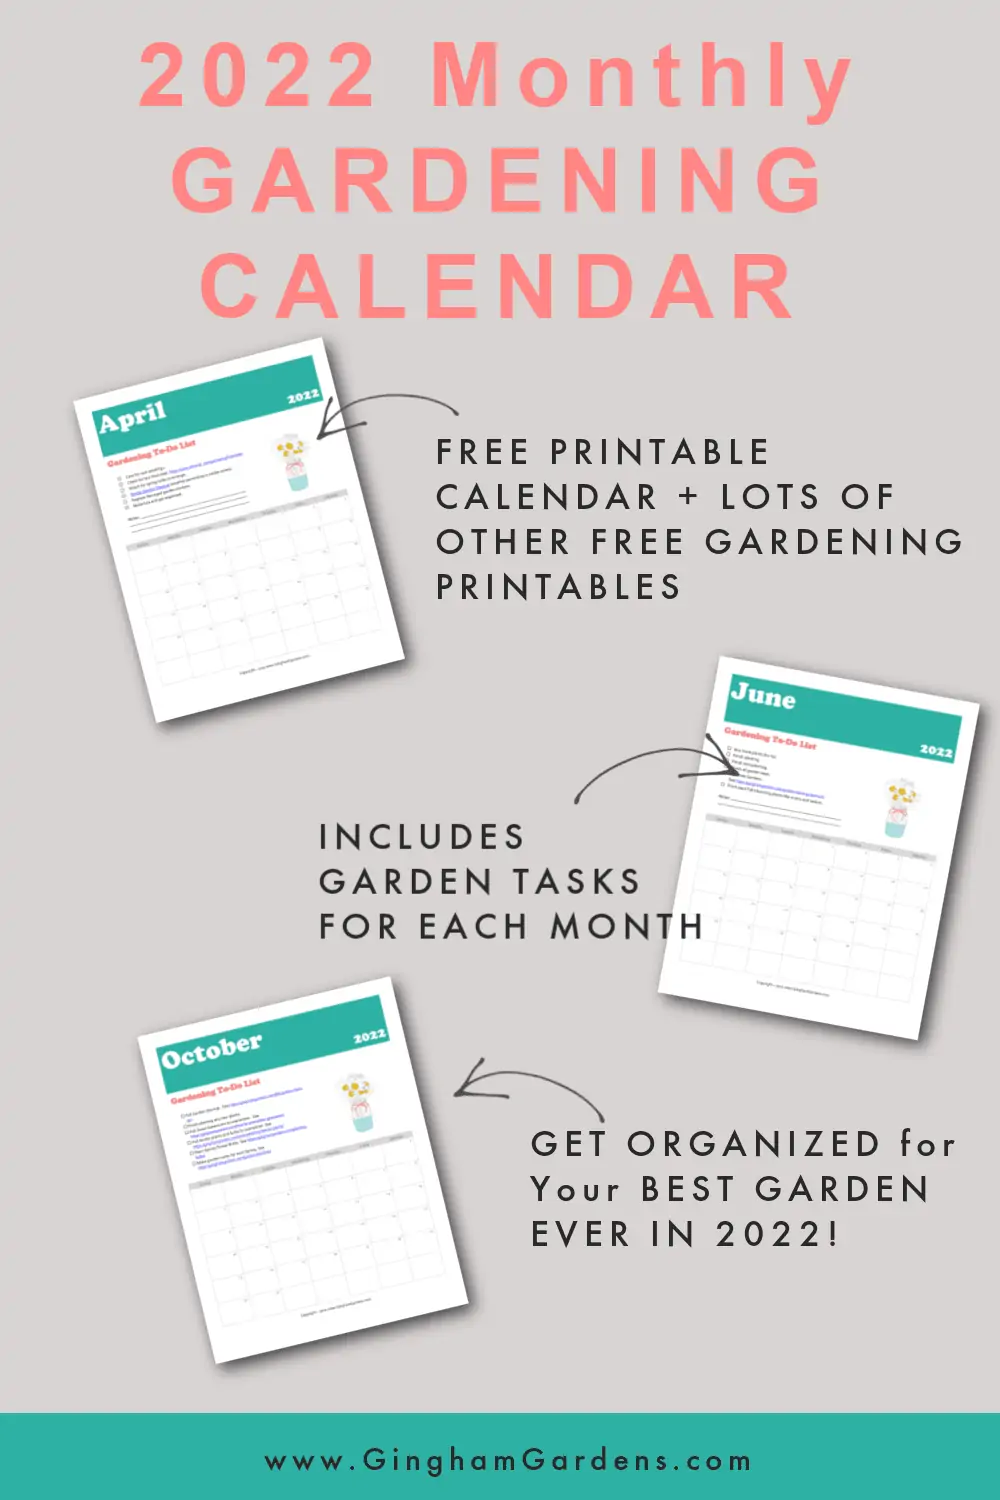 Images of 2022 calendar pages with text overlay - 2022 Gardening Calendar